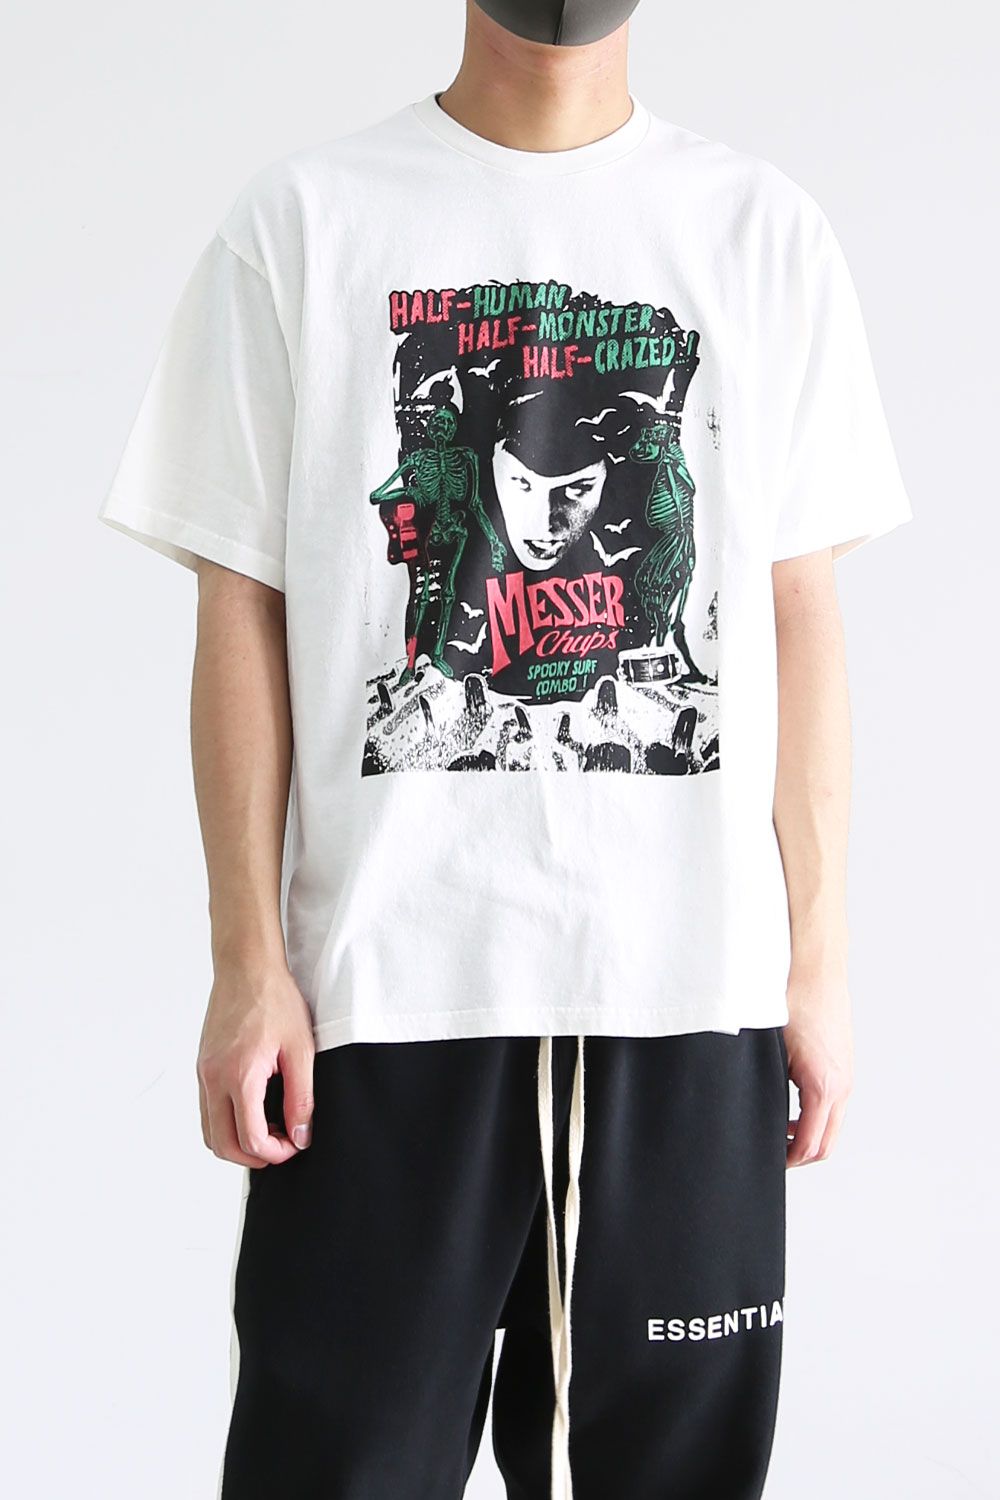 HYSTERIC GLAMOUR - MESSER CHUPS/SPOOKY SURF COMBO! Tシャツ